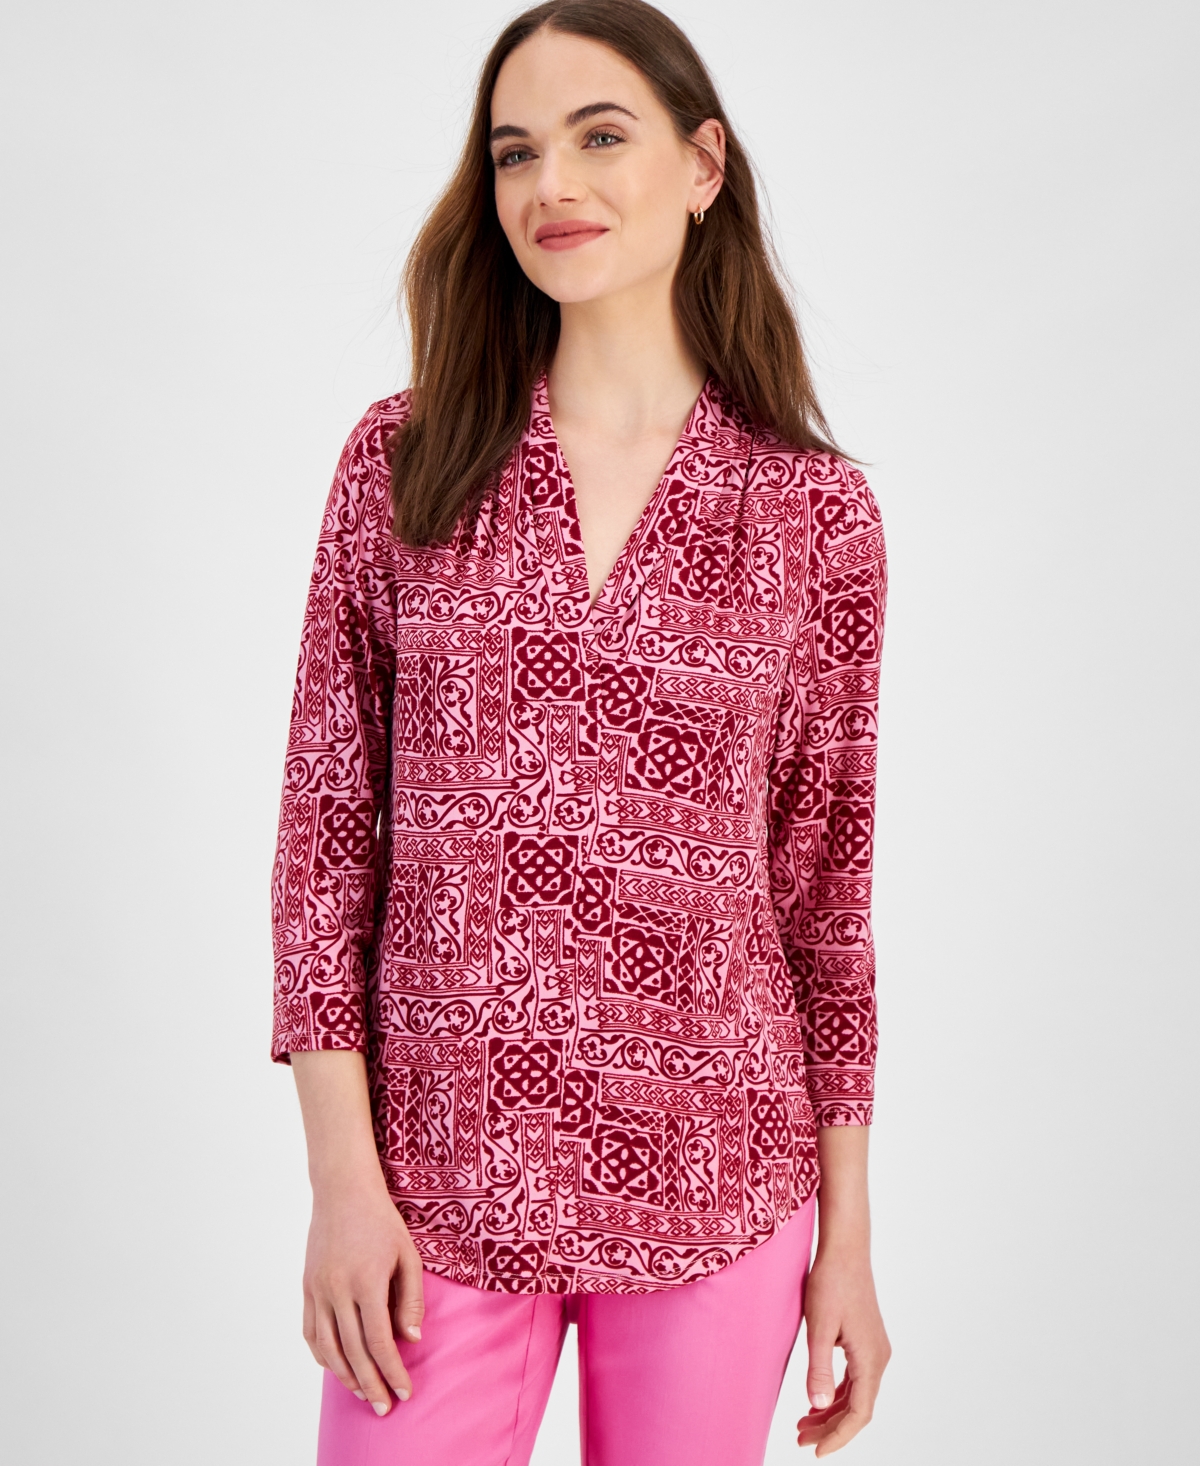 Women's 3/4 Sleeve Printed Pleated-Neck Top, Created for Macy's - Blosom Berry Combo